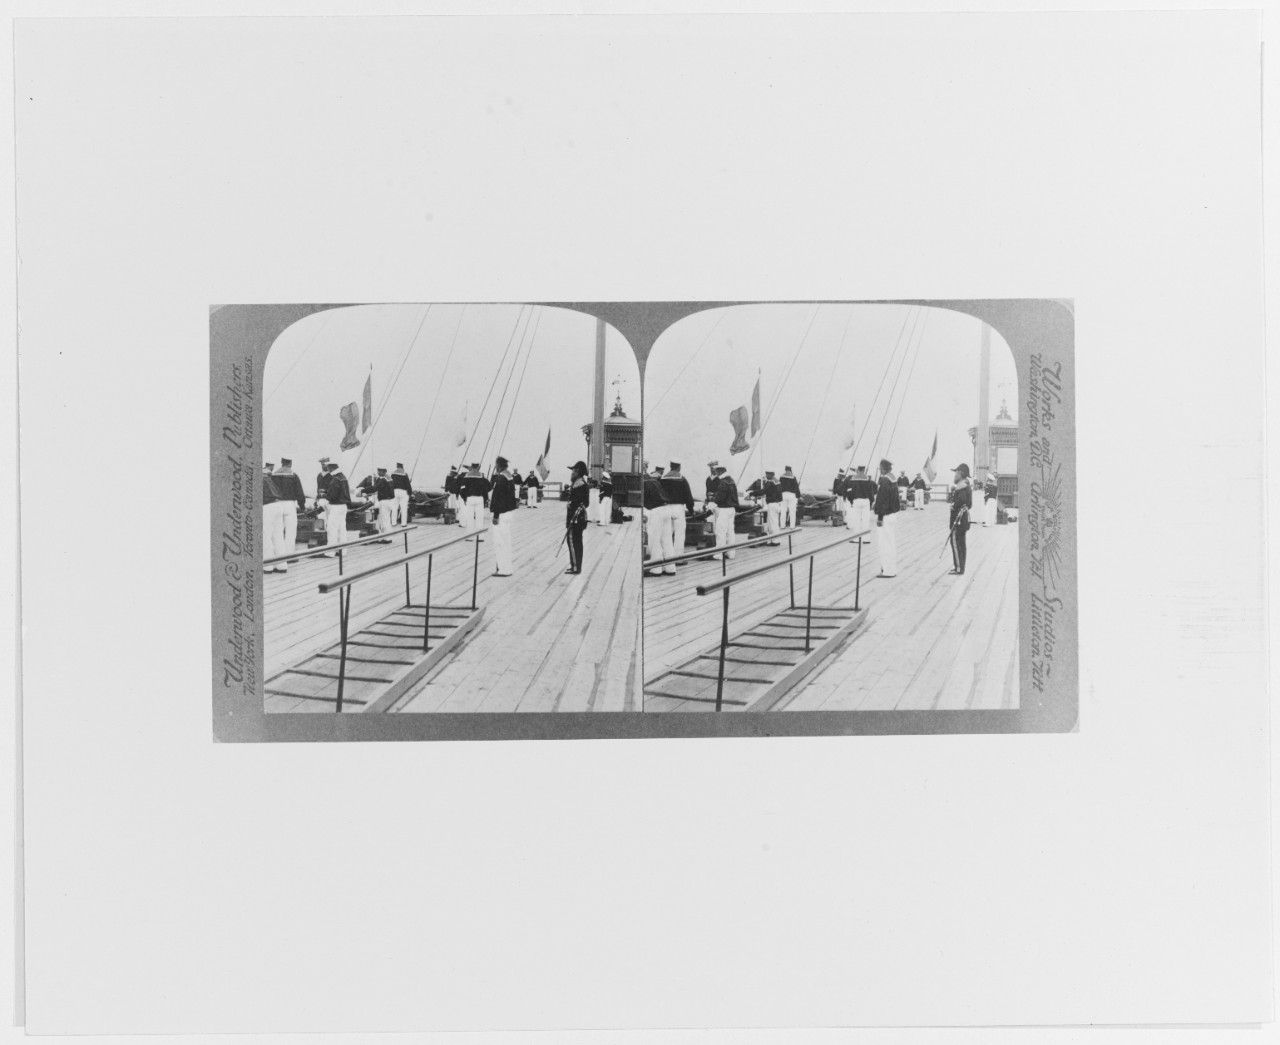 Foreign personnel, stereo photo